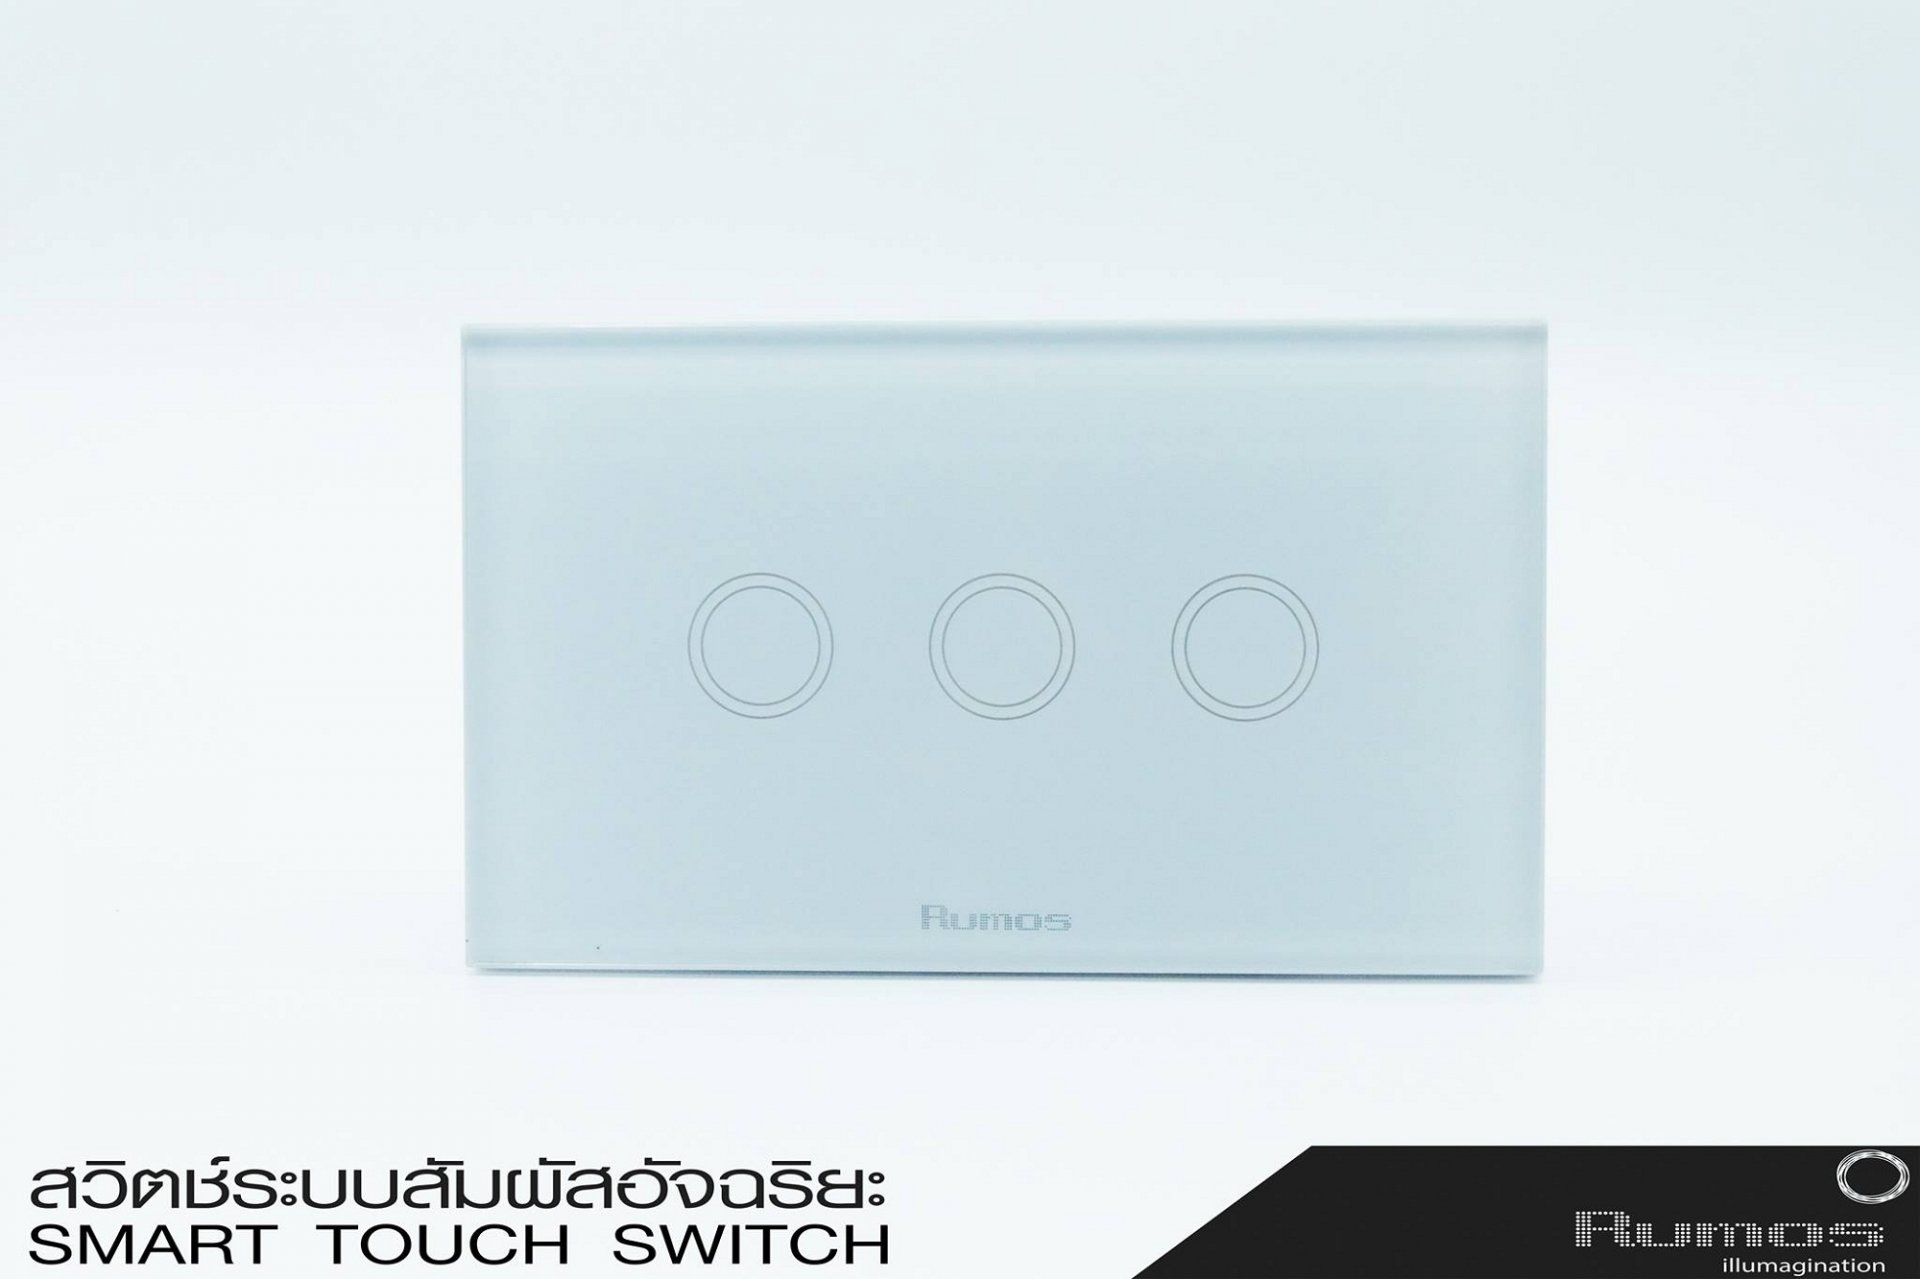 Rumos touch switch 3gangs 1 way white with remote function